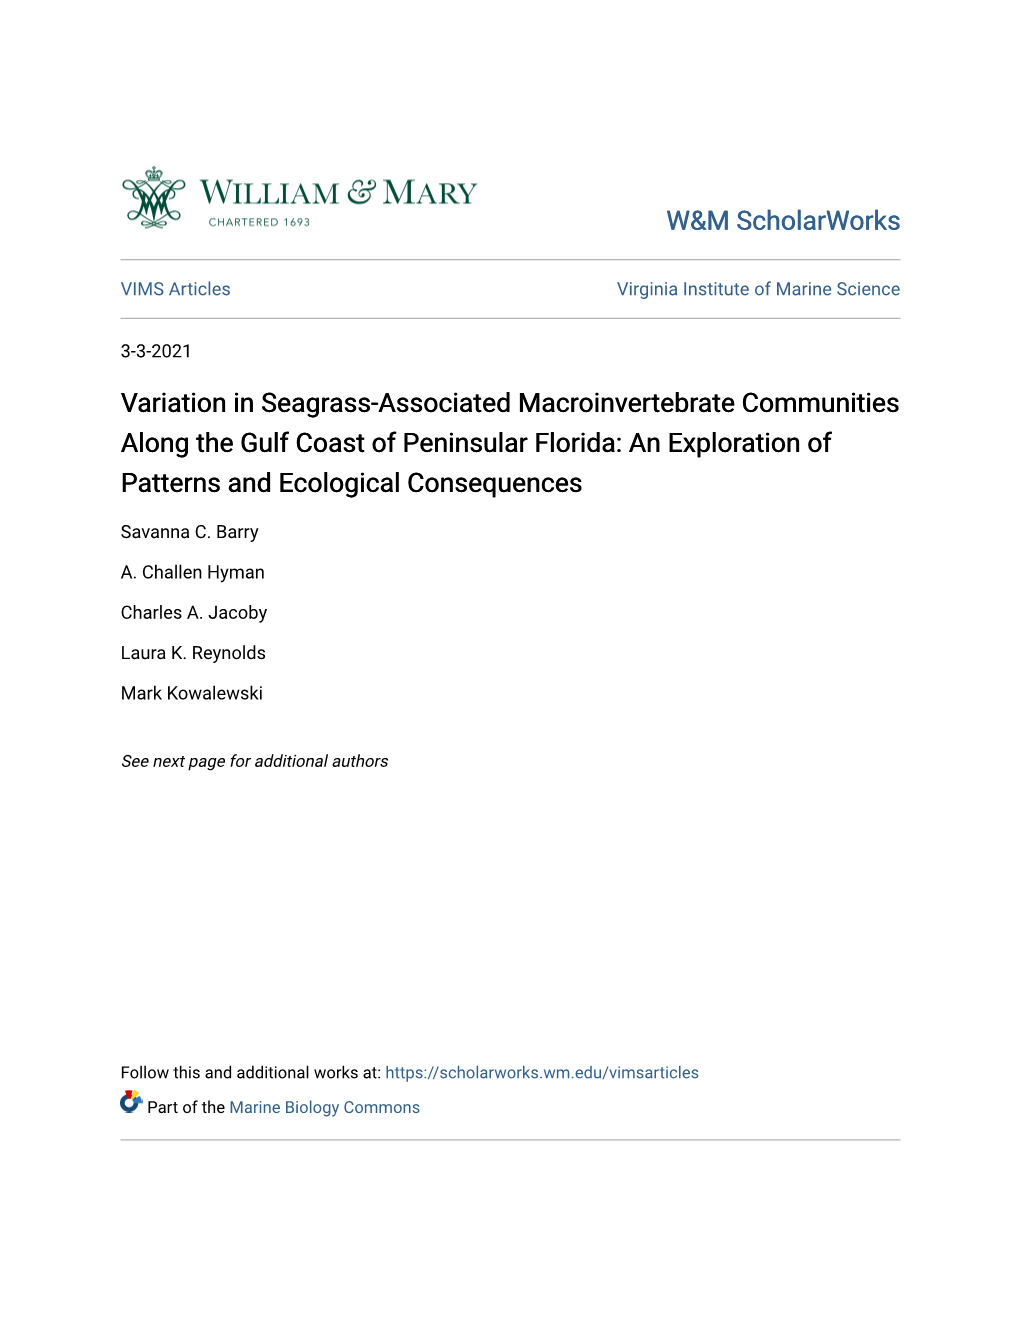 Variation in Seagrass-Associated Macroinvertebrate Communities Along the Gulf Coast of Peninsular Florida: an Exploration of Patterns and Ecological Consequences